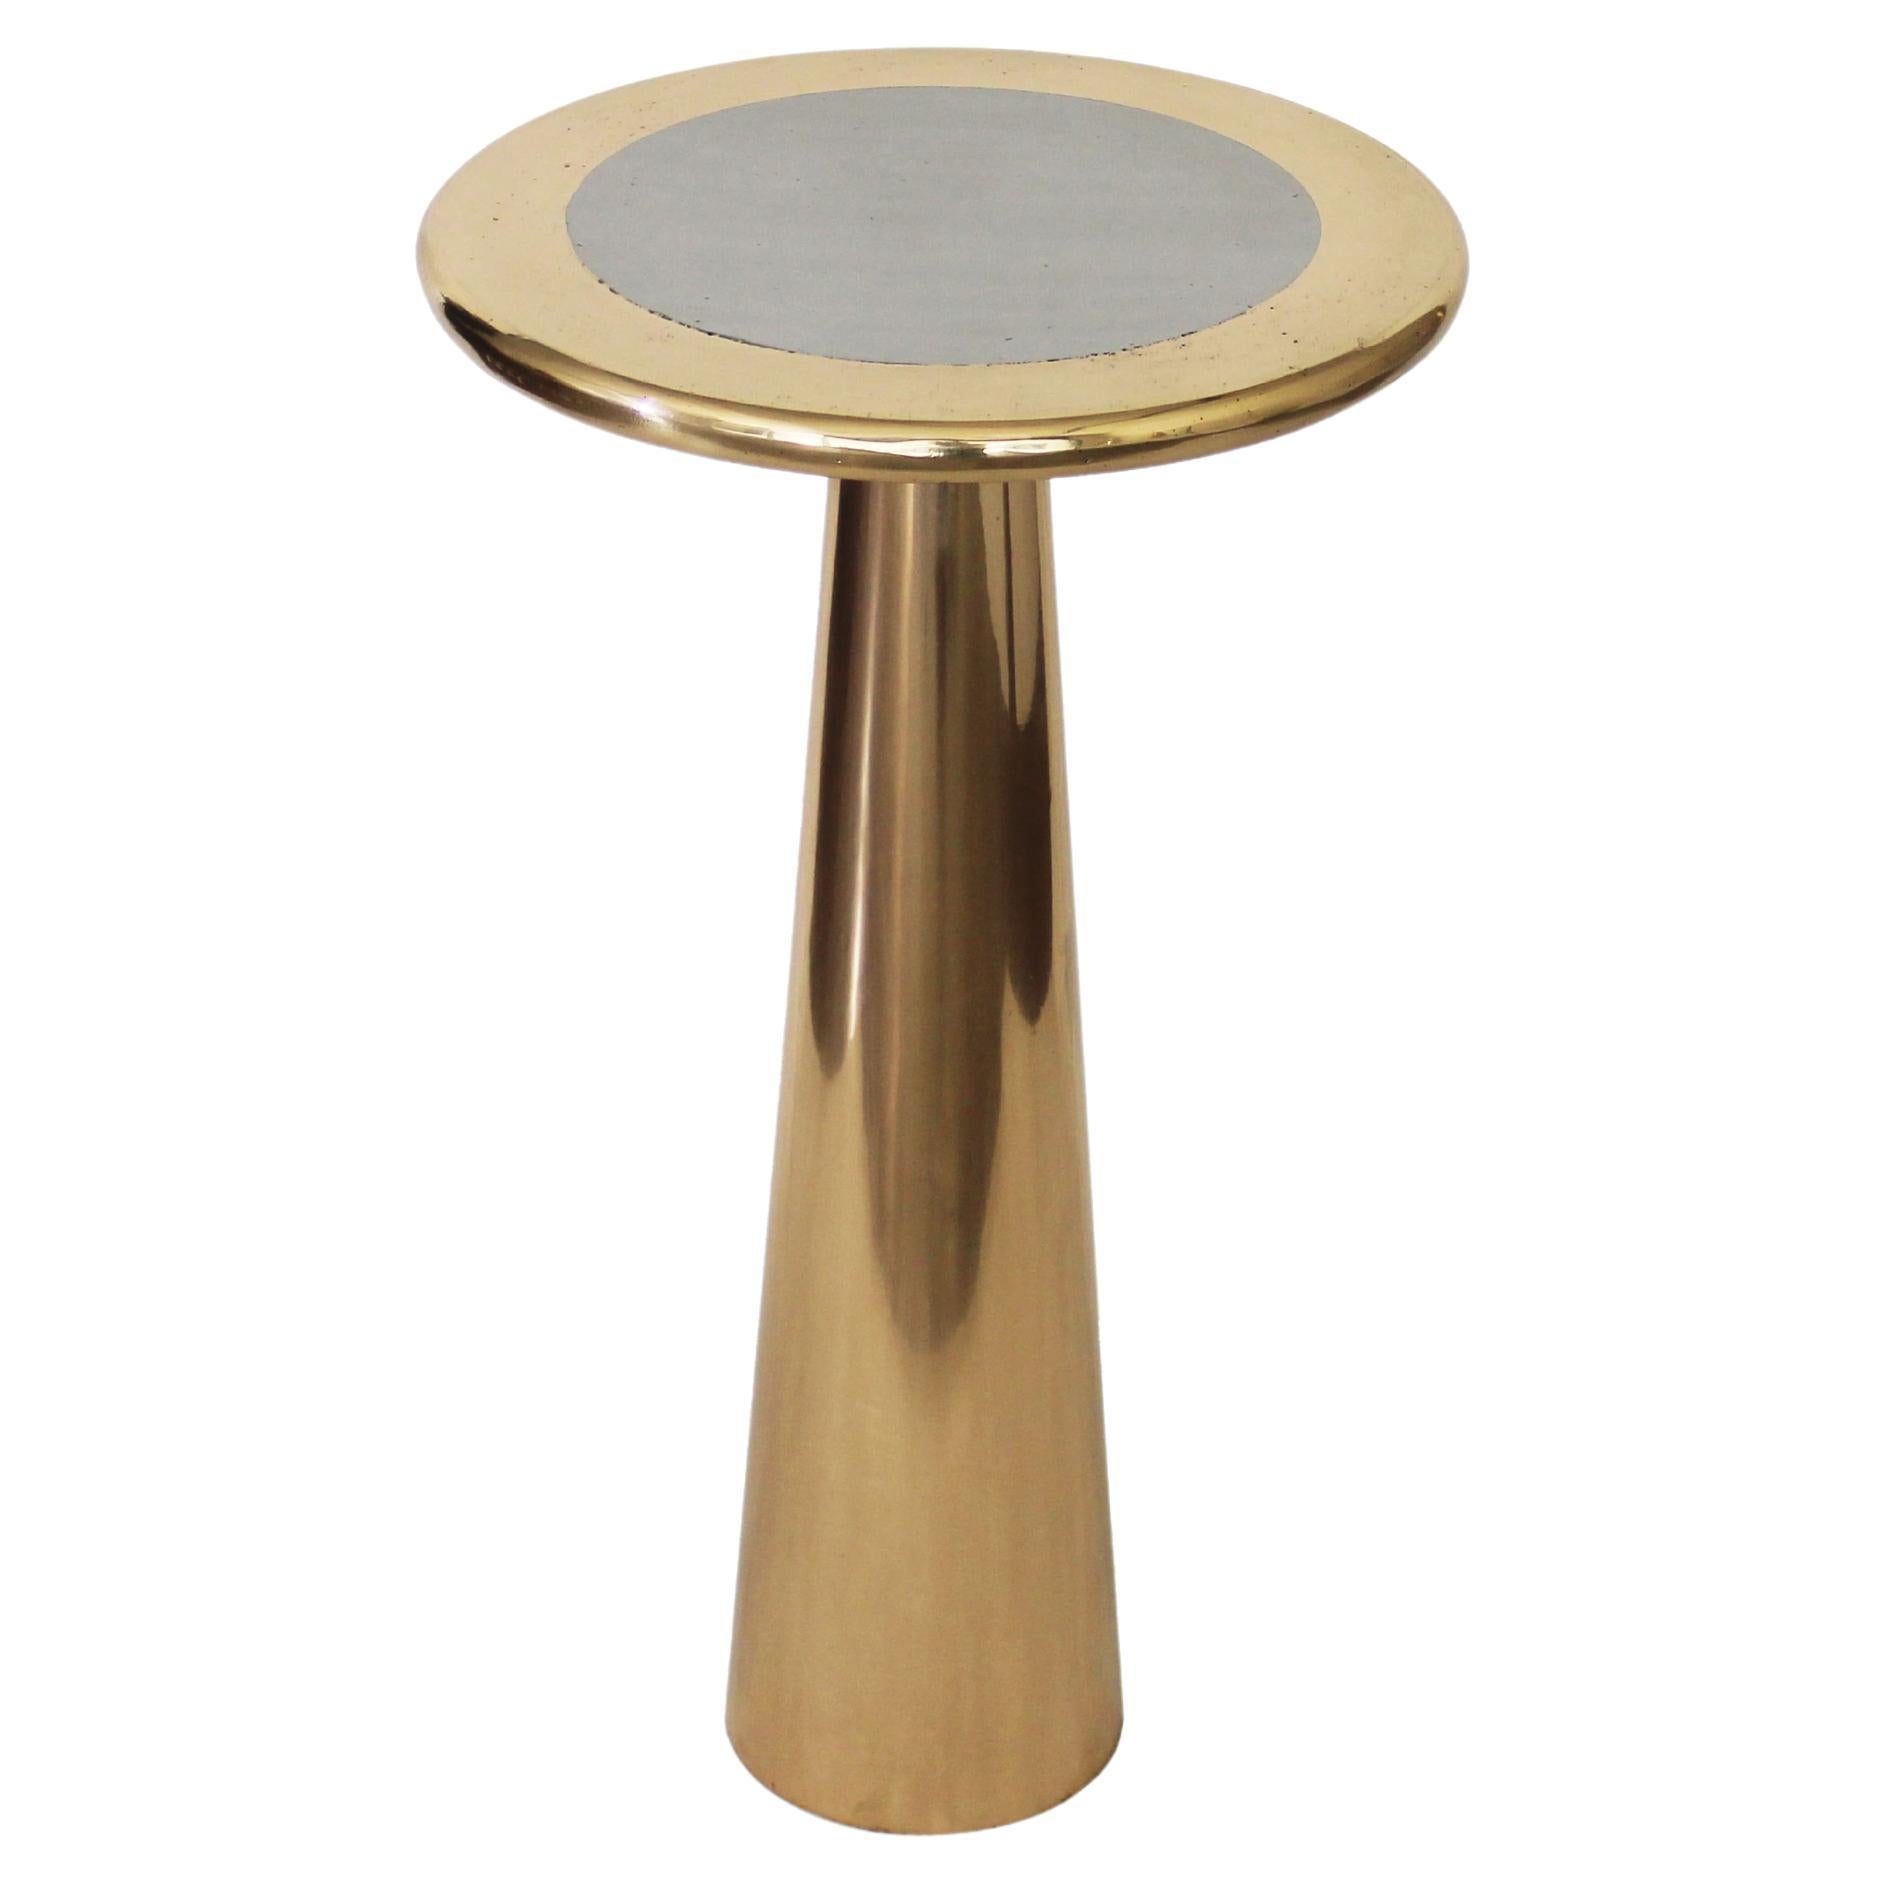 Cast Bronze and Stainless Steel Lega Side Table by Studio Sunt